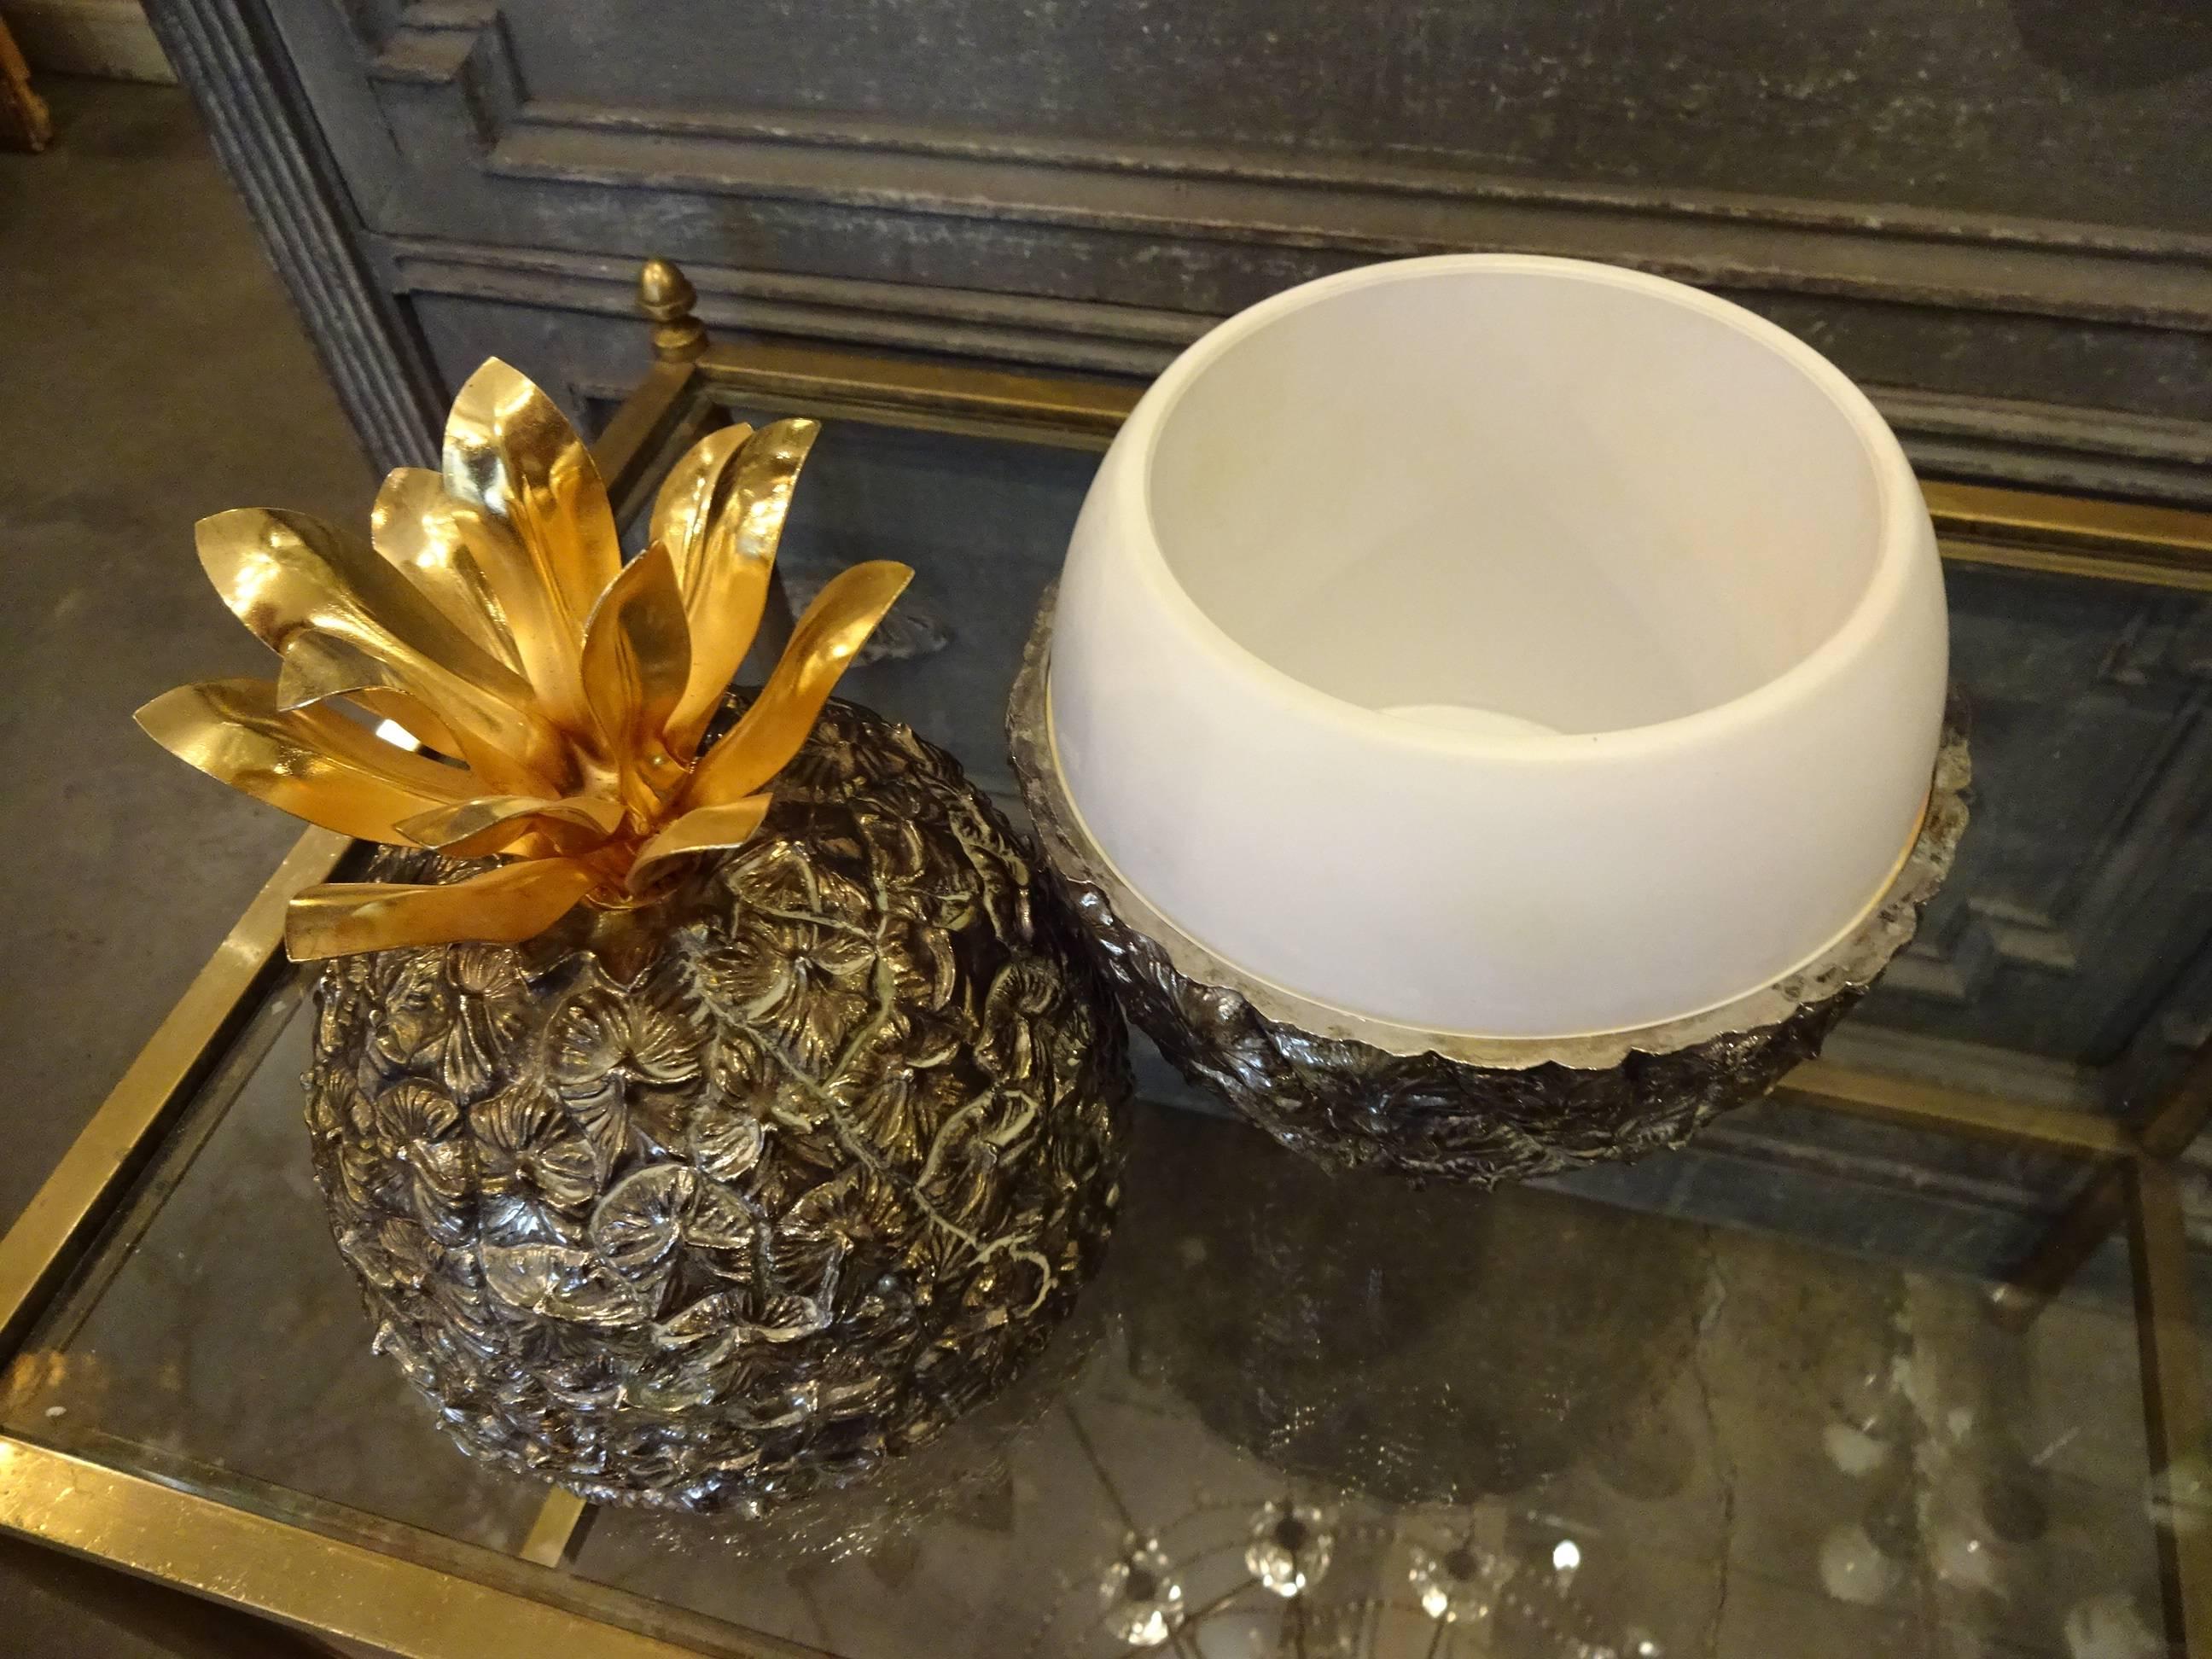 Wonderful French pineapple shaped ice bucket by Michel Dartois, Paris, 1970s. Made of silver-plated metal, plastic container, solid brass base stamped with 'Made in Paris' and Michel Dartois and adorned with beautiful brass leaves on top that serve